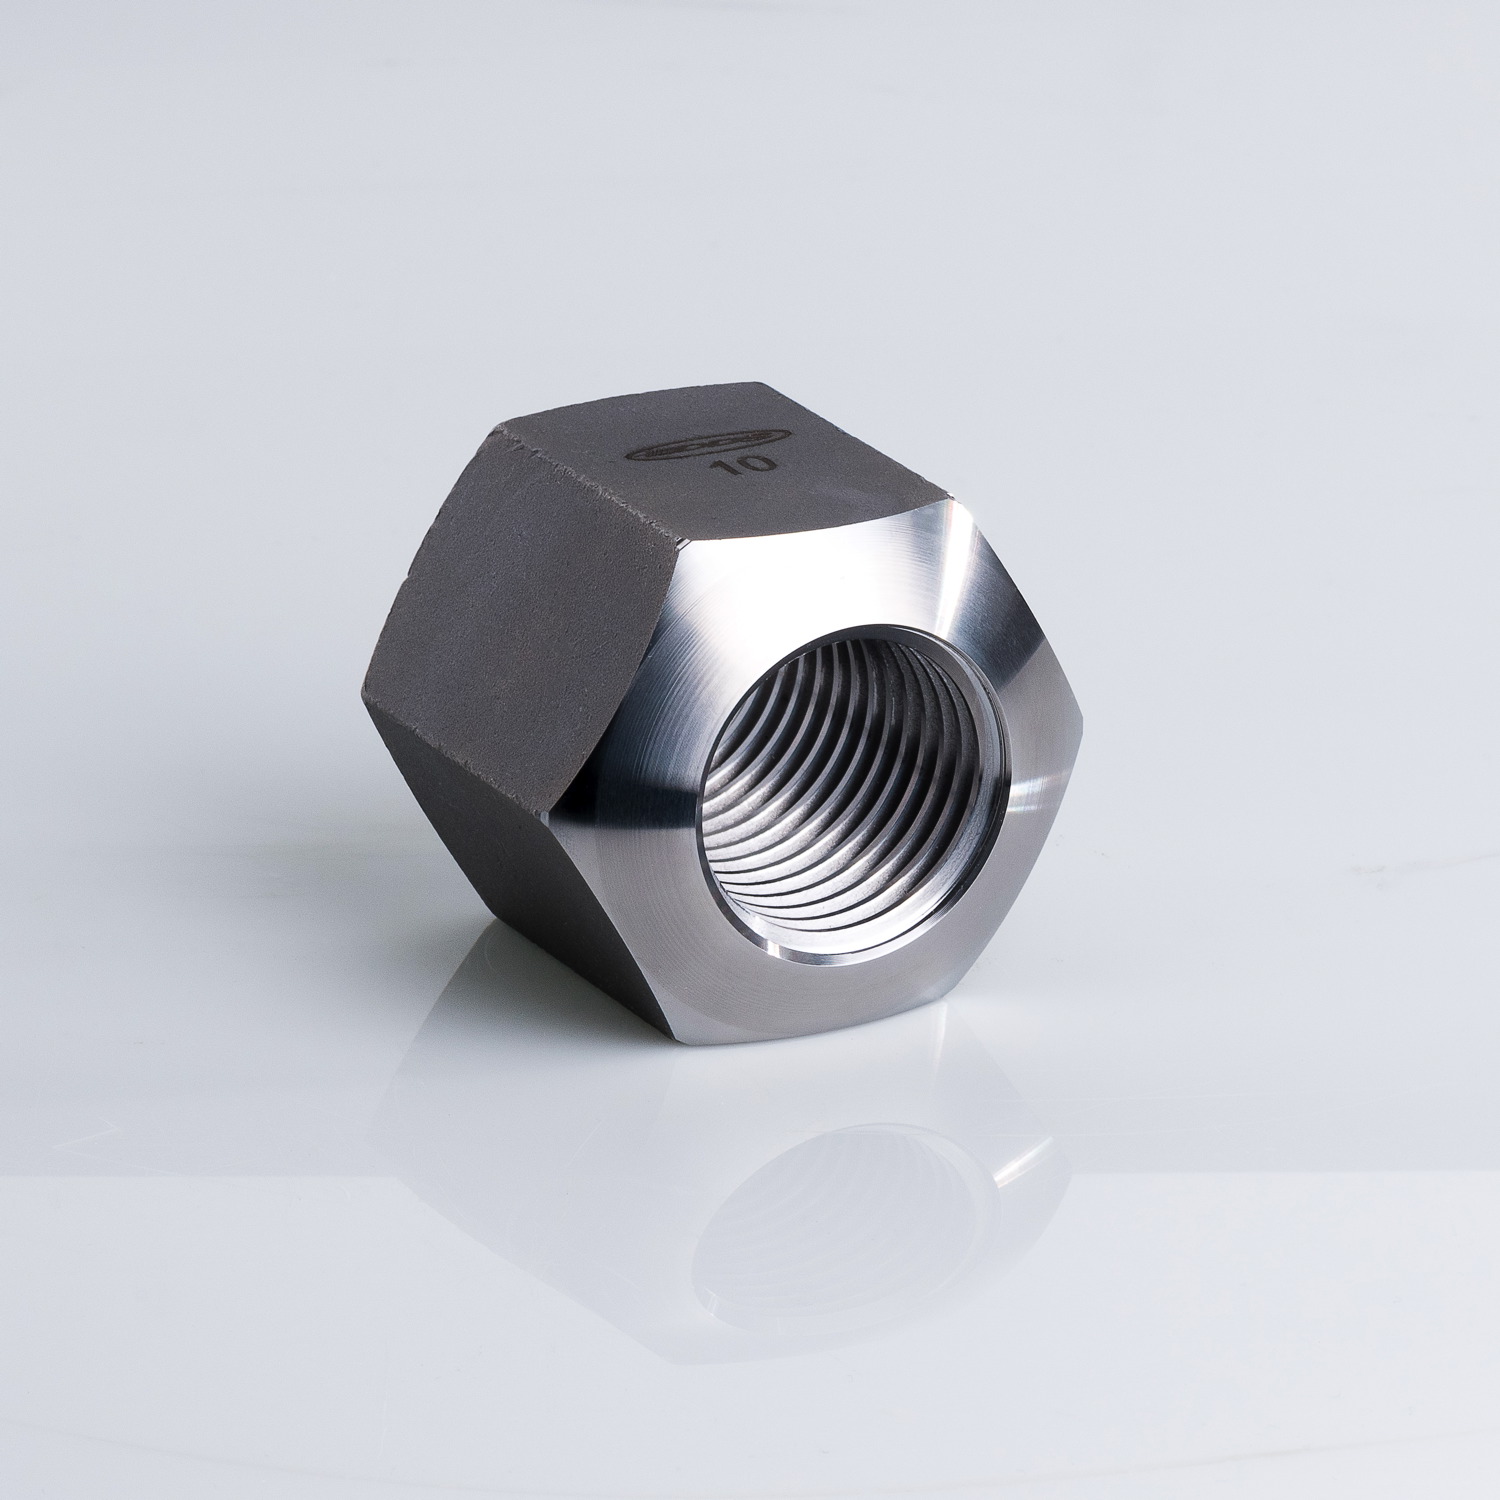 Hexagon nut with a height of 1,5 d DIN 6330